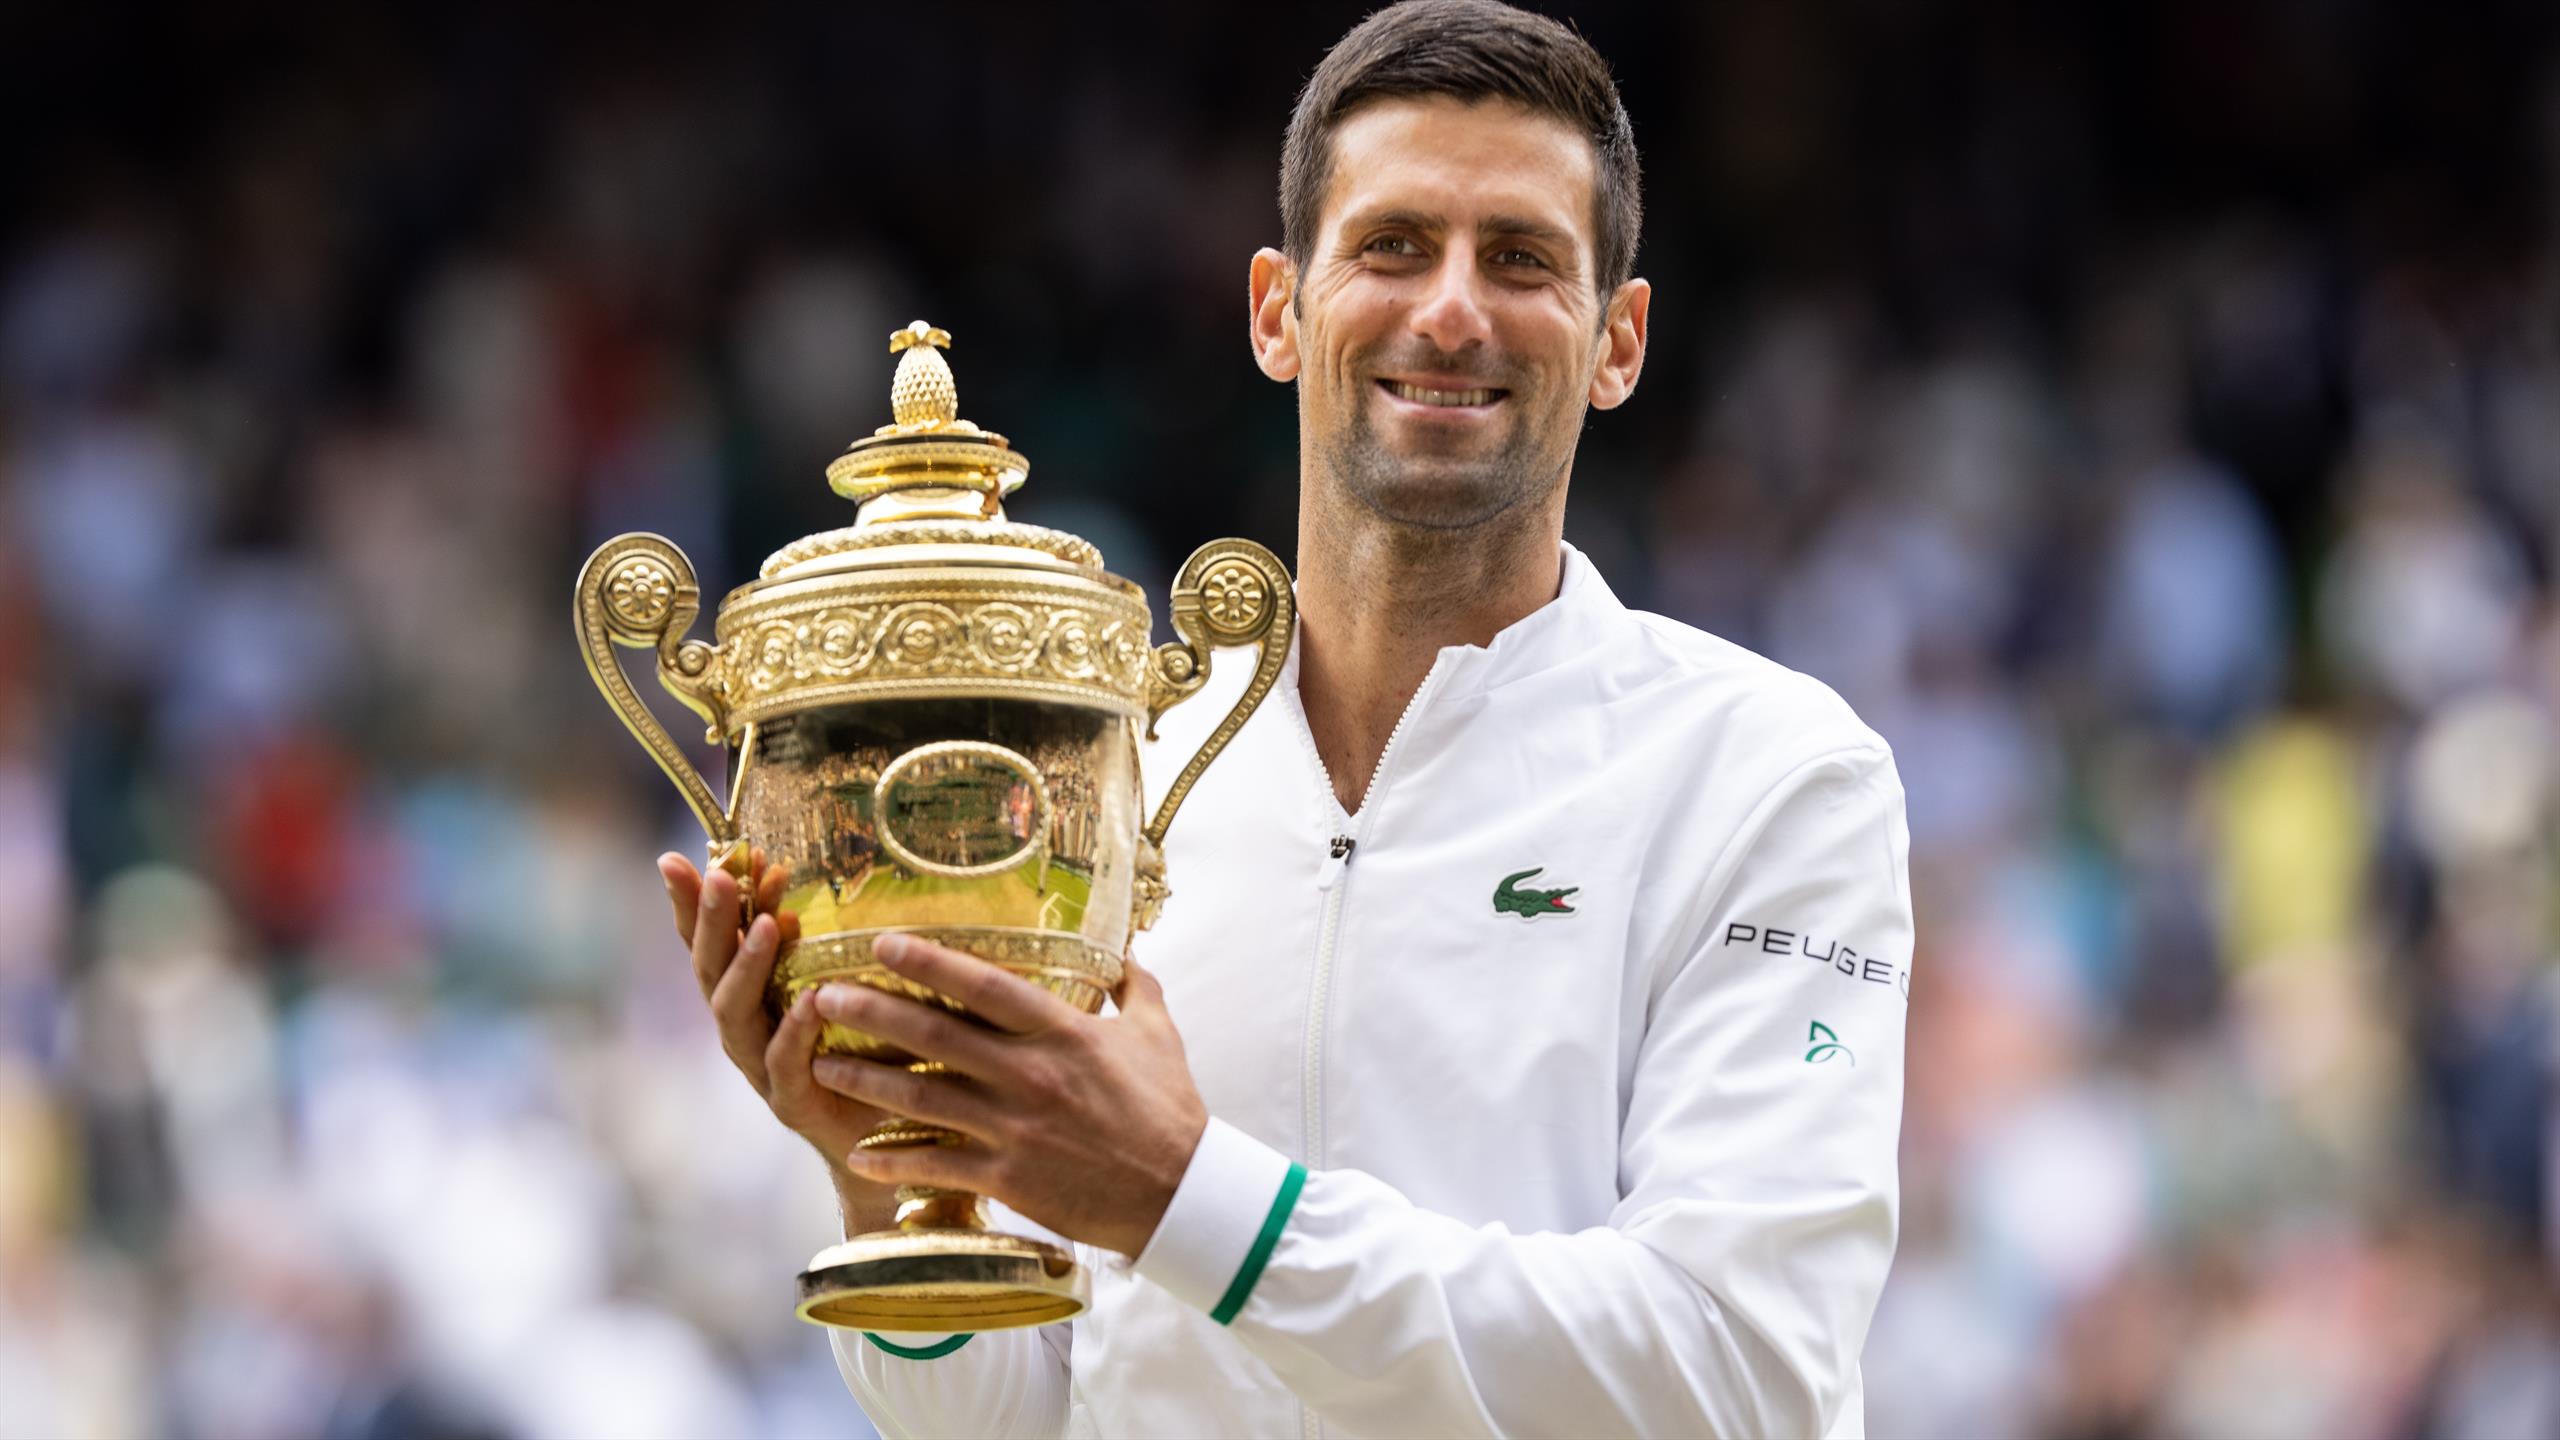 Is Novak Djokovic playing Wimbledon? Will he be one of the favourites? What's his upcoming schedule?